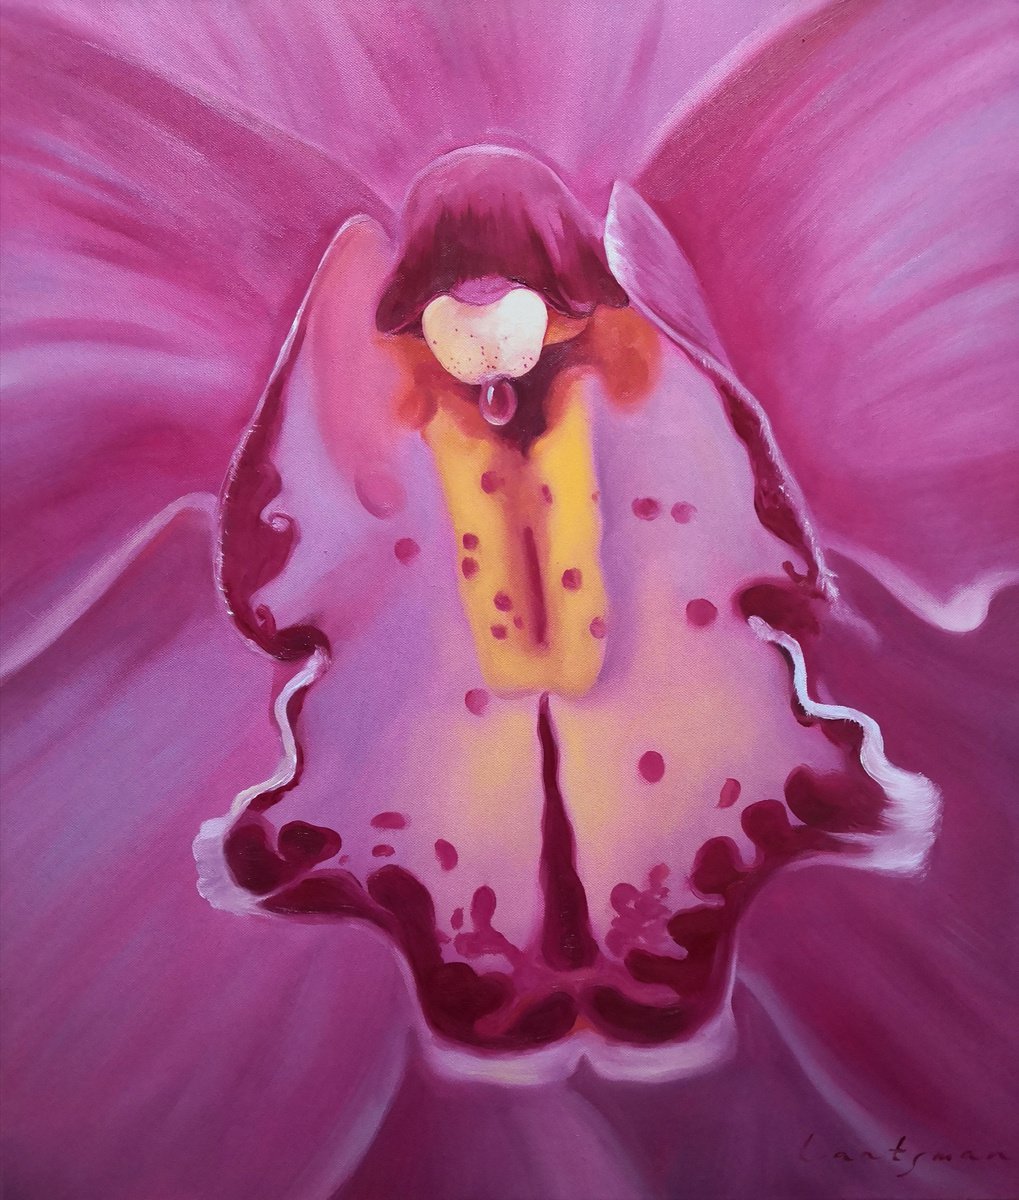 Orchid - a flower of femininity and passion by Jane Lantsman